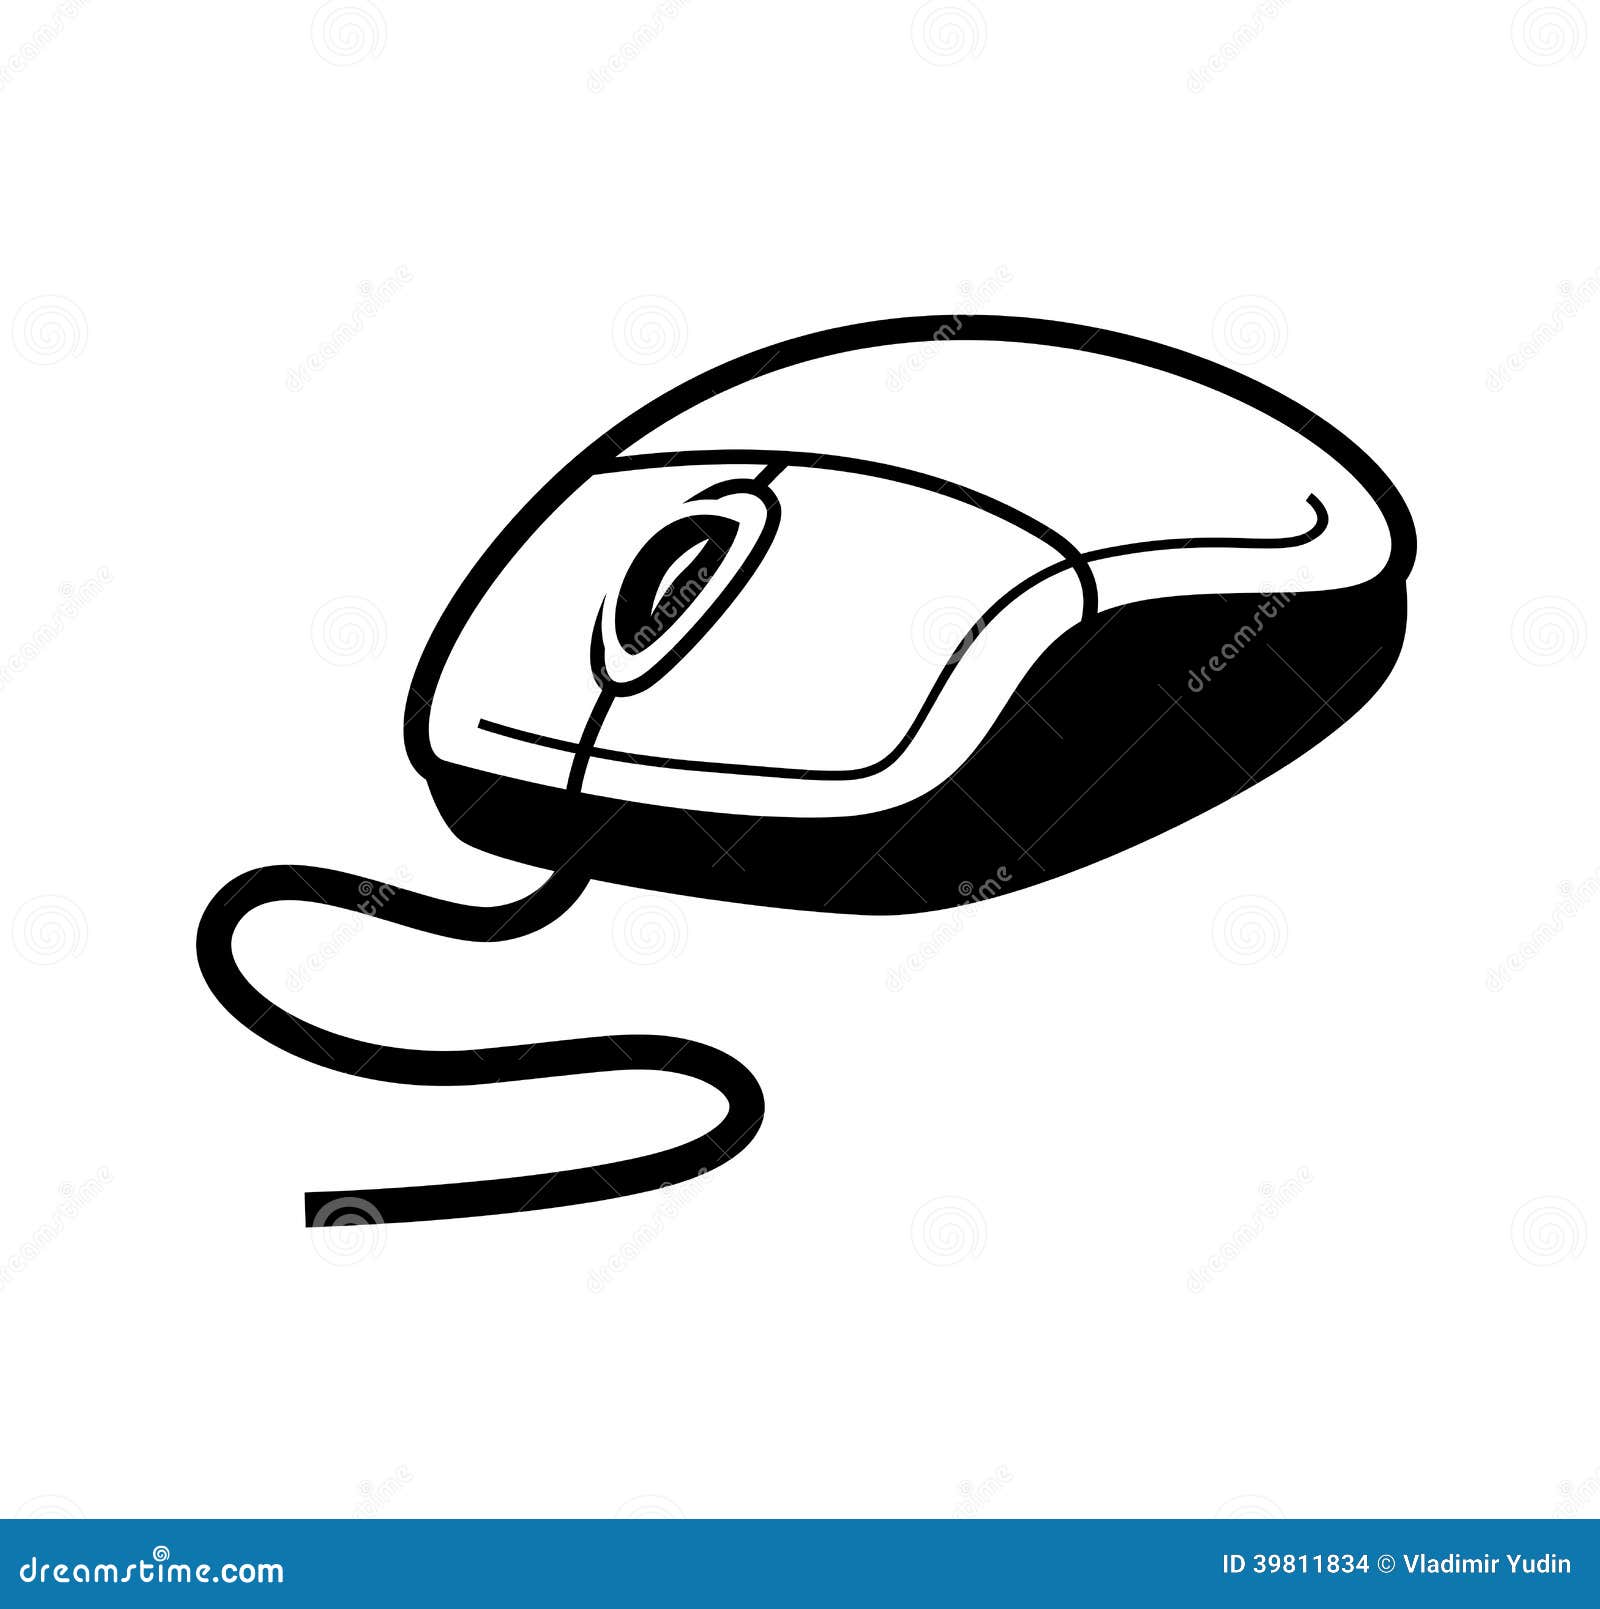 computer mouse clipart black and white - photo #24